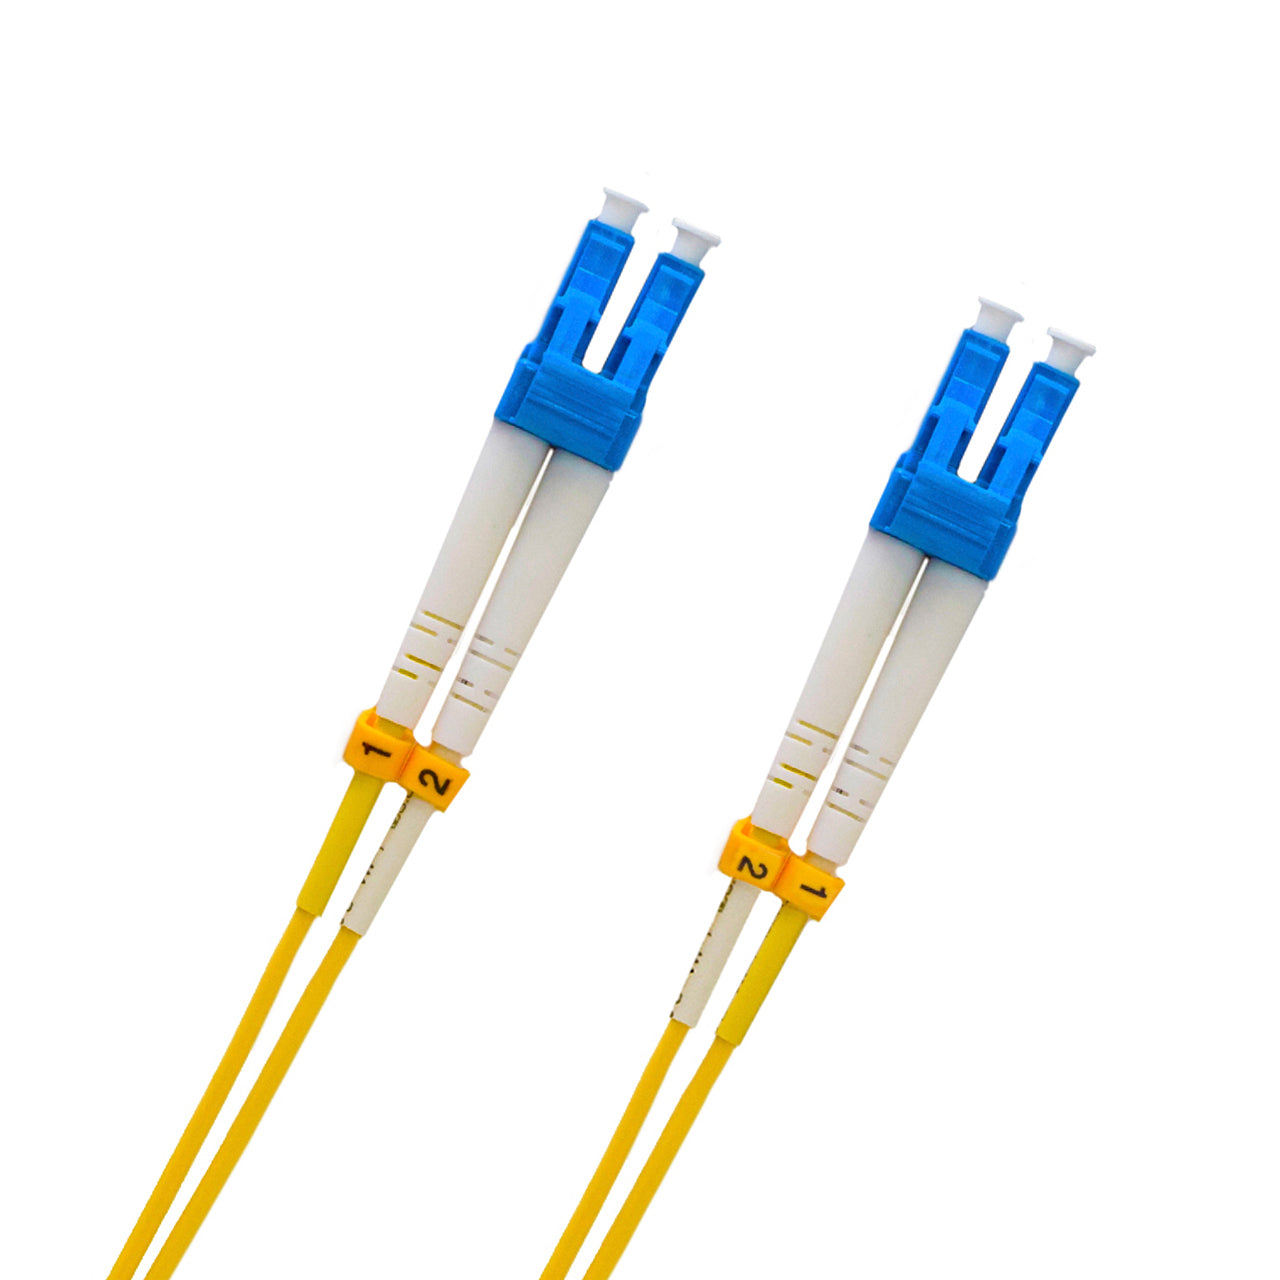 3 Meter LC/LC 9/125 Single-mode OS1 Duplex Fiber Patch Cable